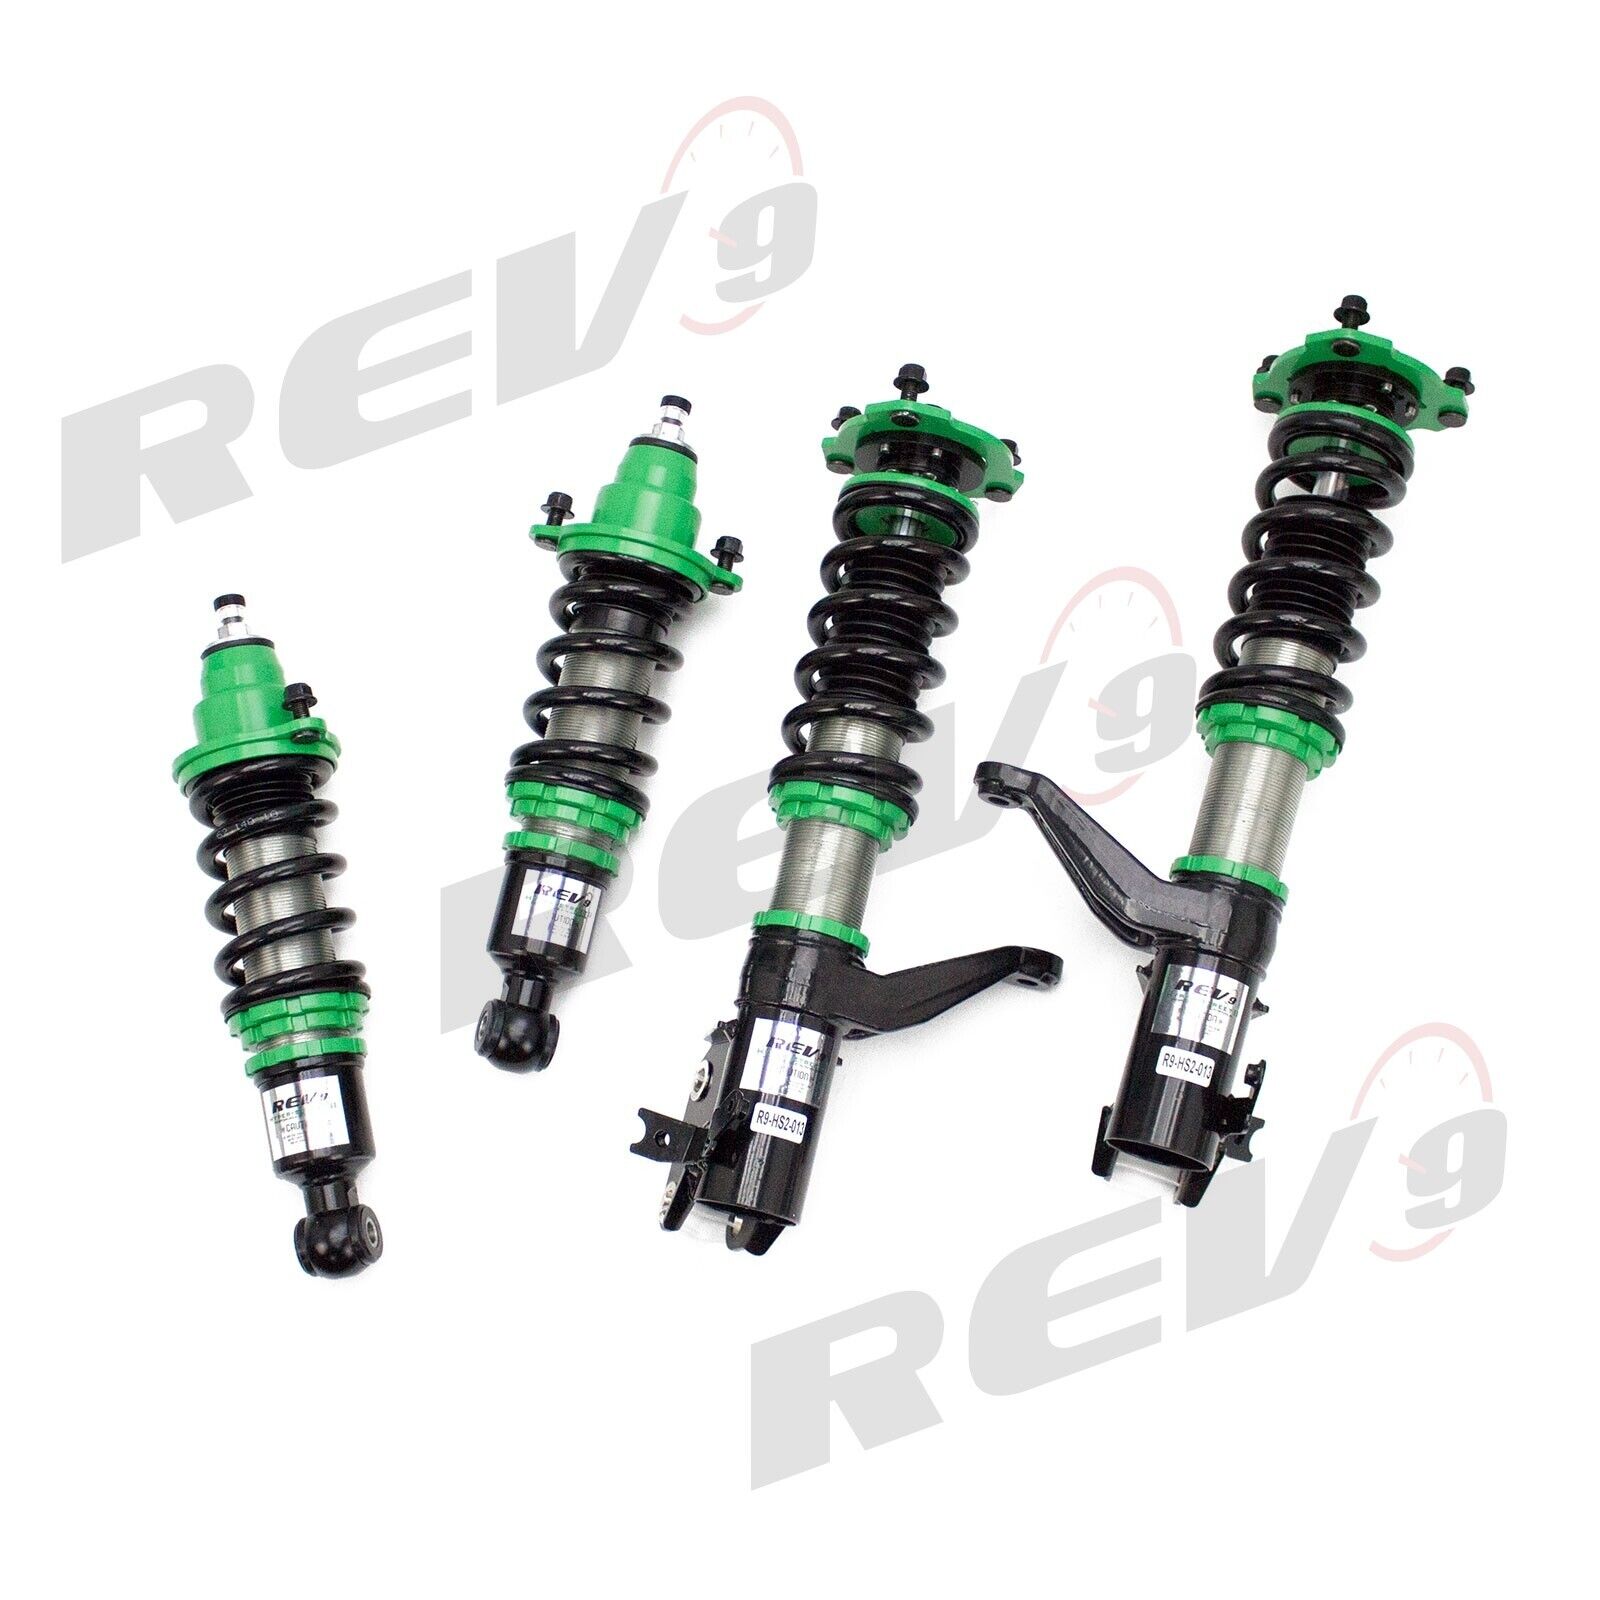 R9-HS2-013_1 Hyper-Street 2 Damper Coilovers Suspension For Acura Rsx DC5 02-06